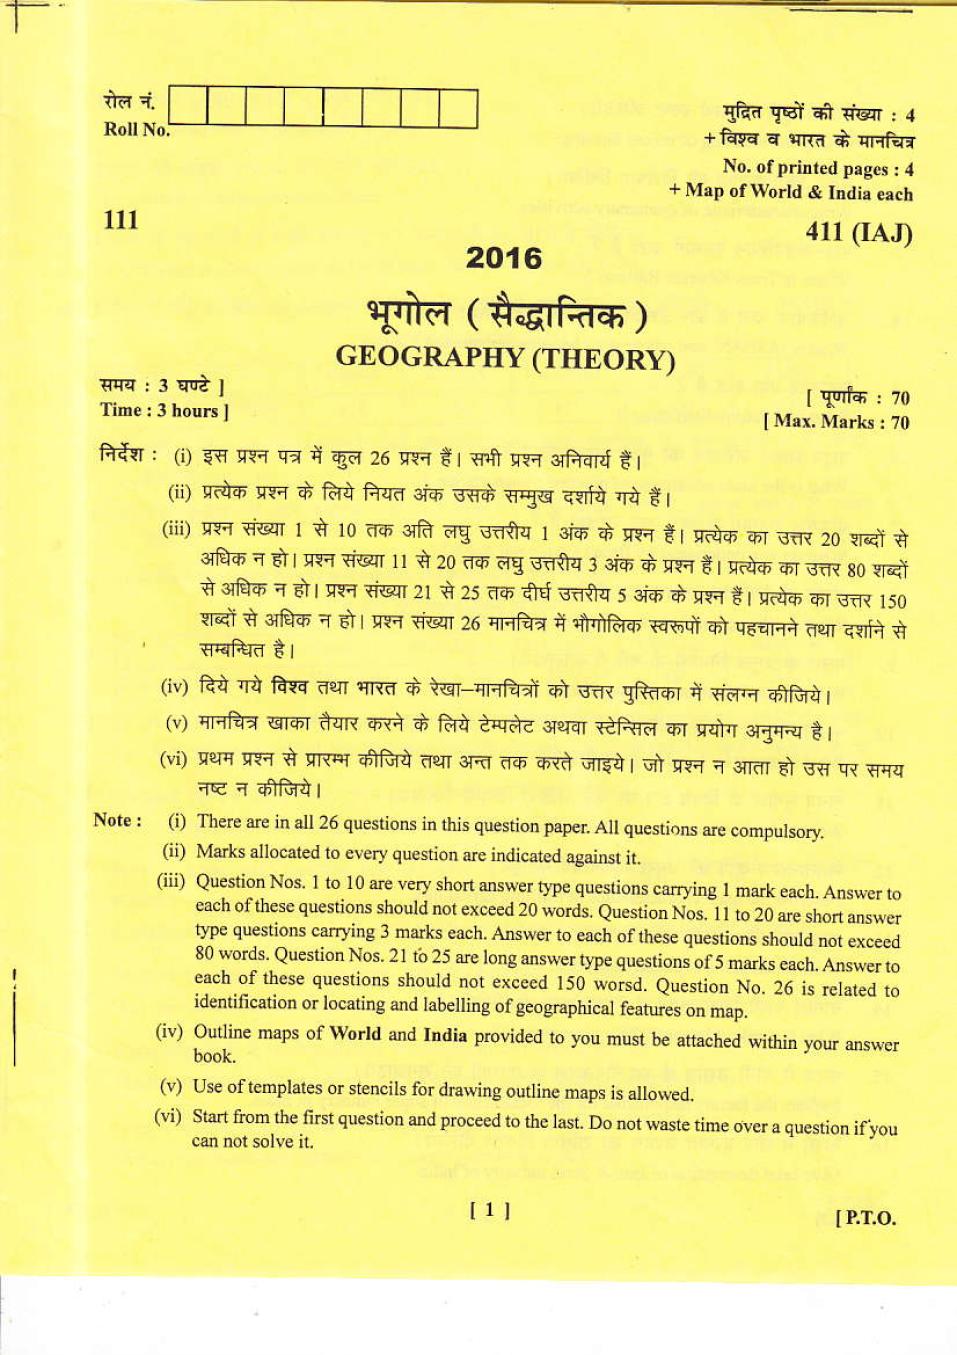 Uttarakhand Board Class 12 Question Paper 2016 for Geography - Page 1